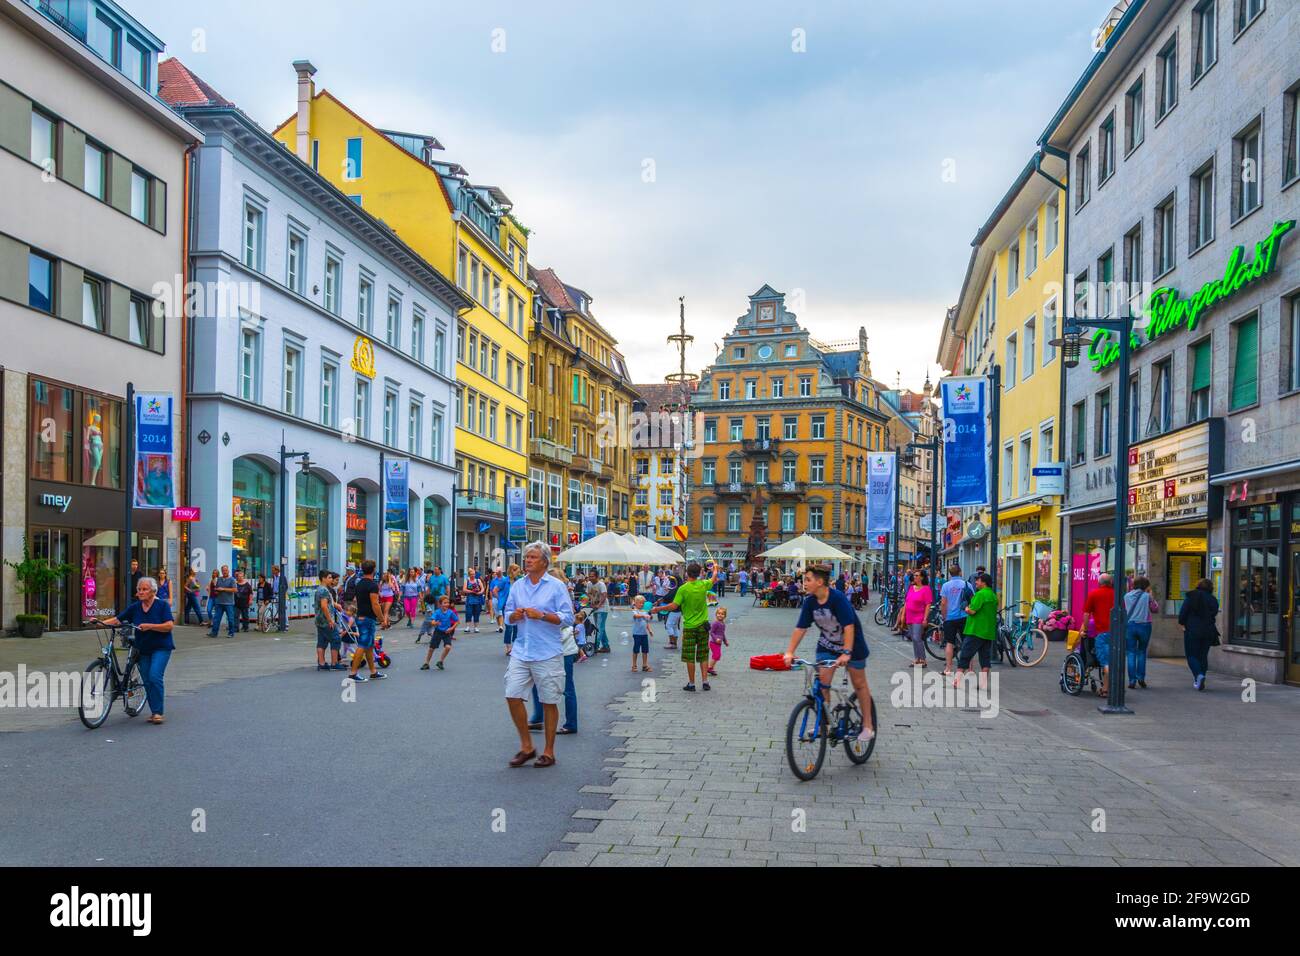 KONSTANZ, GERMANY, JULY 23, 2016: View of the markstatte square with famous kaiserbrunnen fountain in Konstanz in Germany. Stock Photo